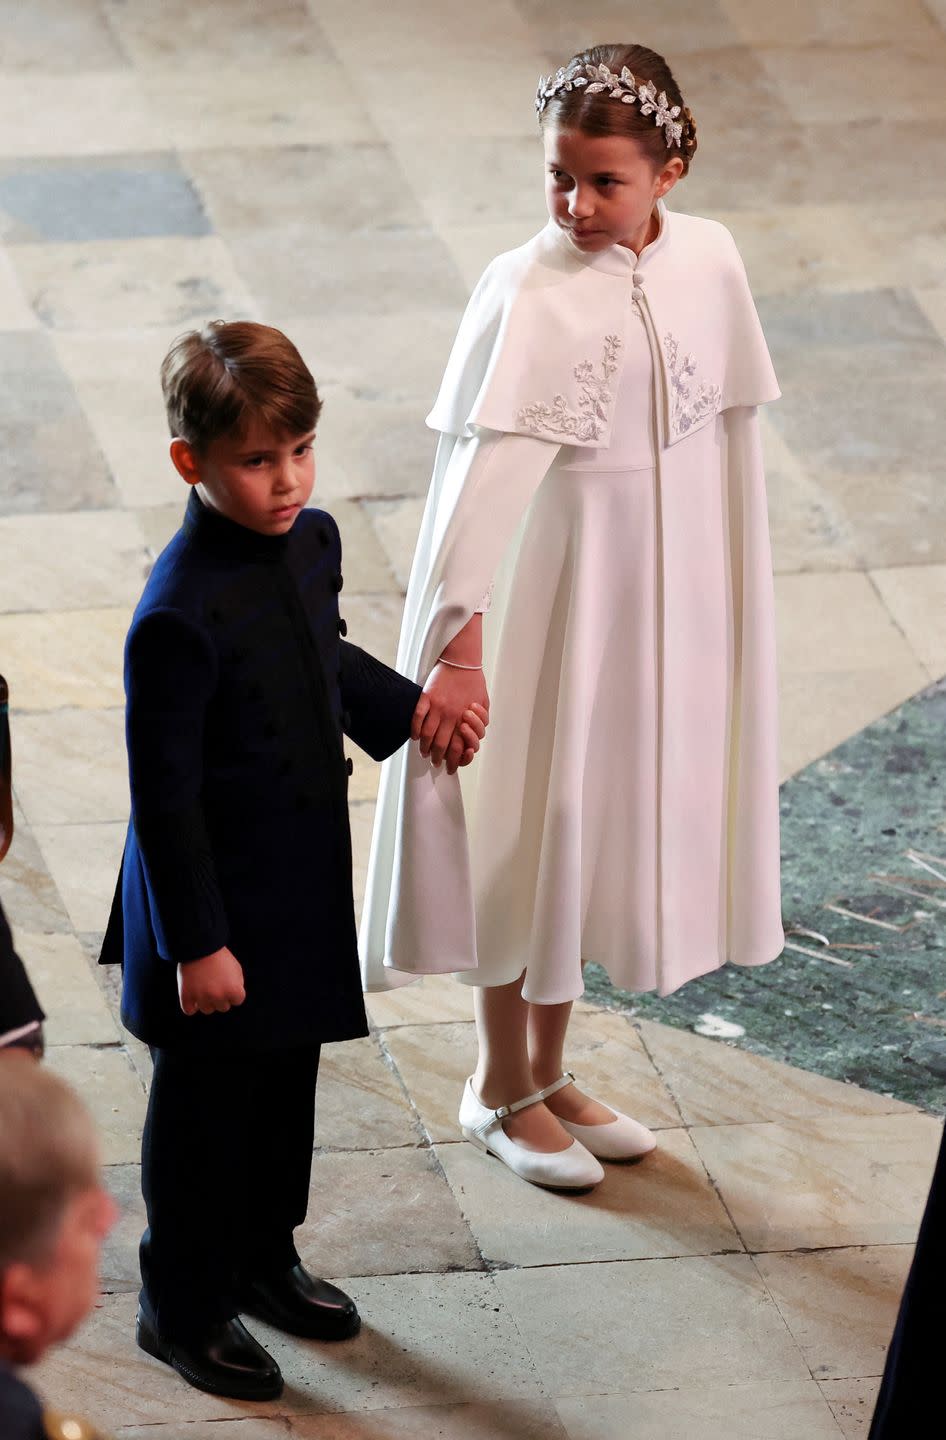 britains princess charlotte of wales and britains prince louis of wales arrive at westminster abbey in central london on may 6, 2023, ahead of the coronations of britains king charles iii and britains camilla, queen consort the set piece coronation is the first in britain in 70 years, and only the second in history to be televised charles will be the 40th reigning monarch to be crowned at the central london church since king william i in 1066 outside the uk, he is also king of 14 other commonwealth countries, including australia, canada and new zealand camilla, his second wife, will be crowned queen alongside him, and be known as queen camilla after the ceremony photo by phil noble pool afp photo by phil noblepoolafp via getty images